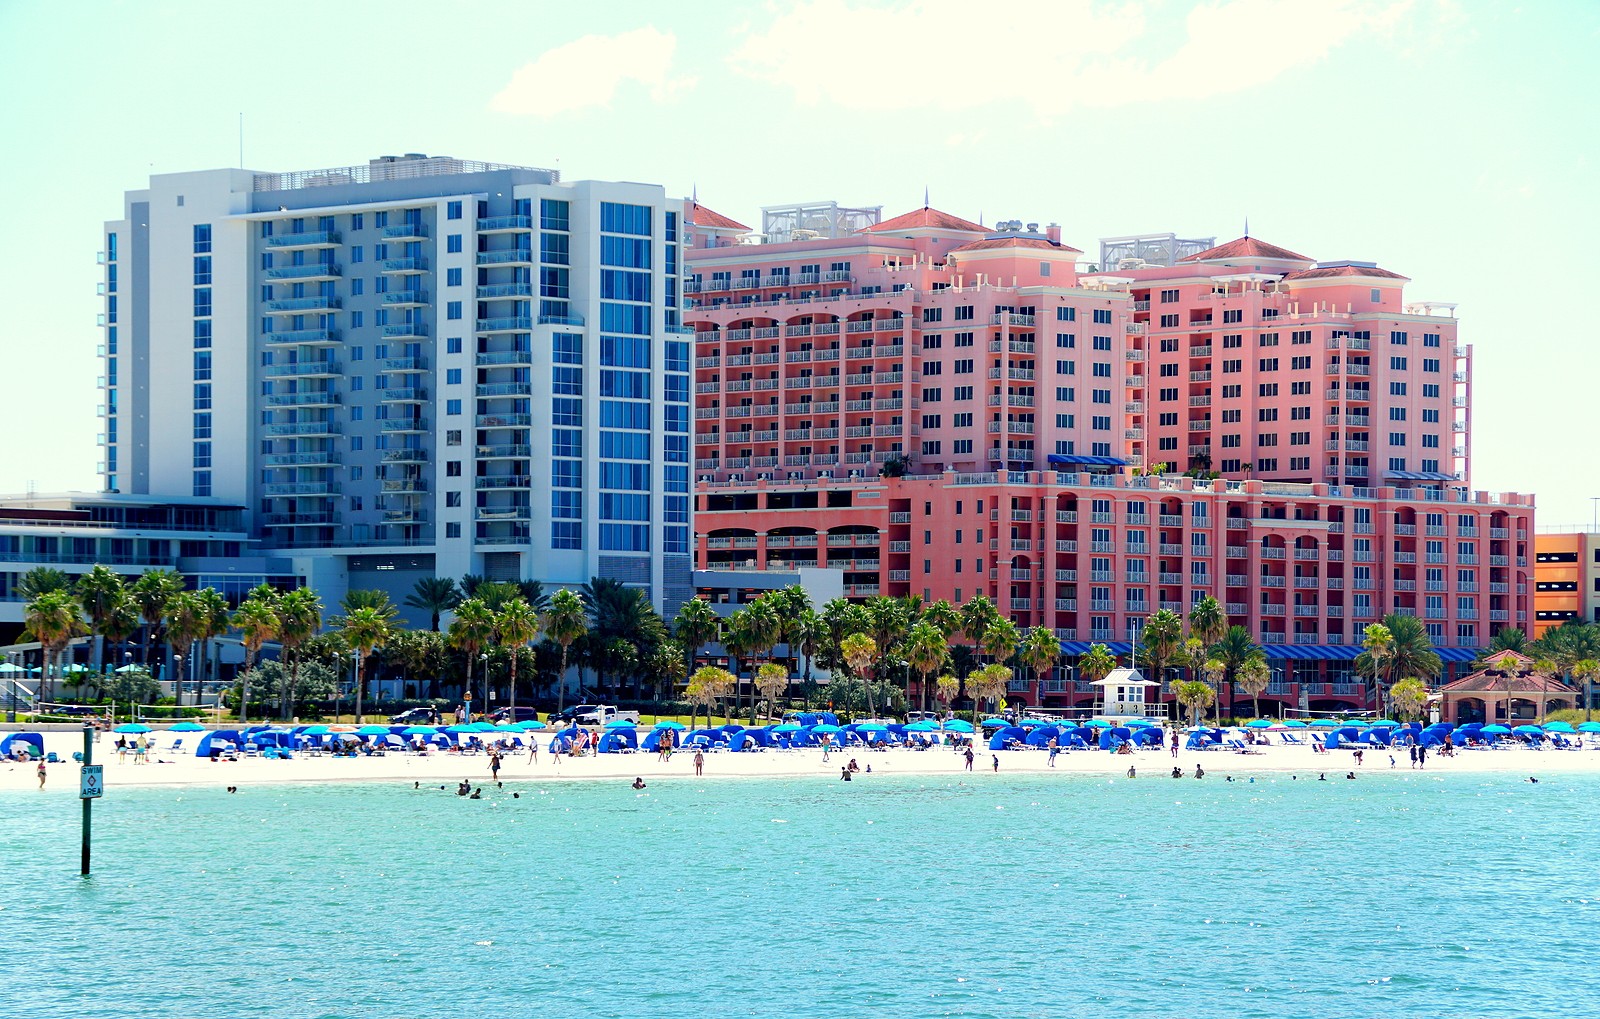 View of Clearwater, Florida, beach and resorts from water.